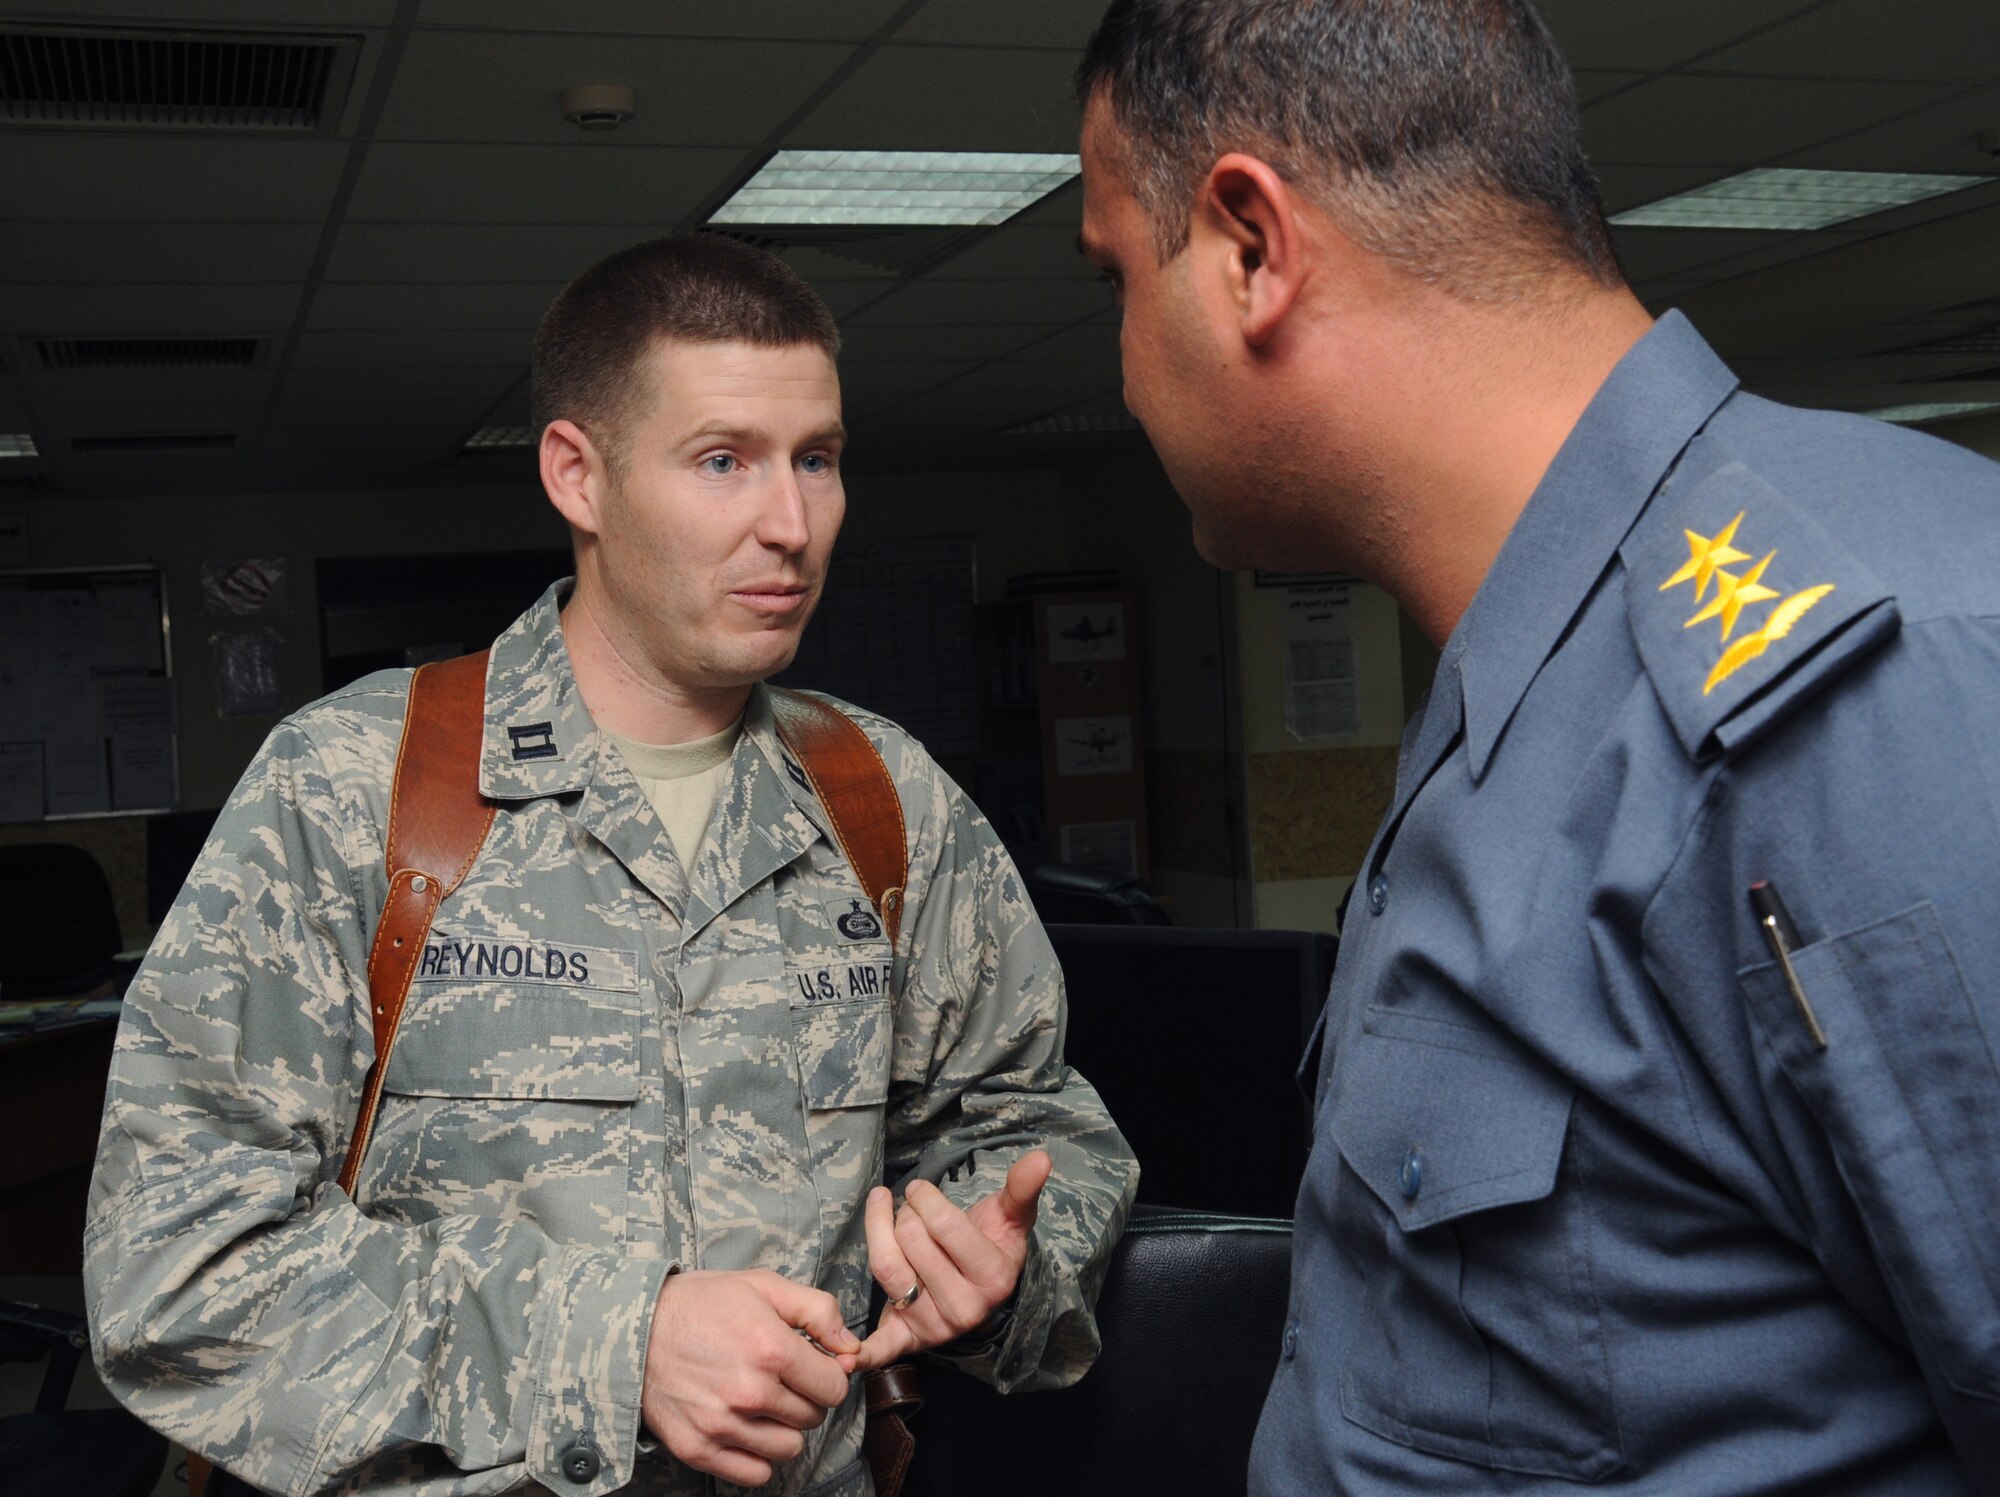 CAMP VICTORY, Iraq -- Air Force Captain Sean Reynolds, Iraq Training and Advisory Mission - Iraqi Air Operations Center intelligence advisor, speaks Arabic with an Iraqi air force officer Nov. 25, 2009. The prior-enlisted officer served as an Arabic linguist for seven years and says understanding the language has helped facilitate communication throughout the IAOC. Captain Reynolds is deployed from Goodfellow Air Force Base, Texas, and hails from San Diego, Calif. (U.S. Air Force photo/Tech. Sgt. Johnny L. Saldivar)